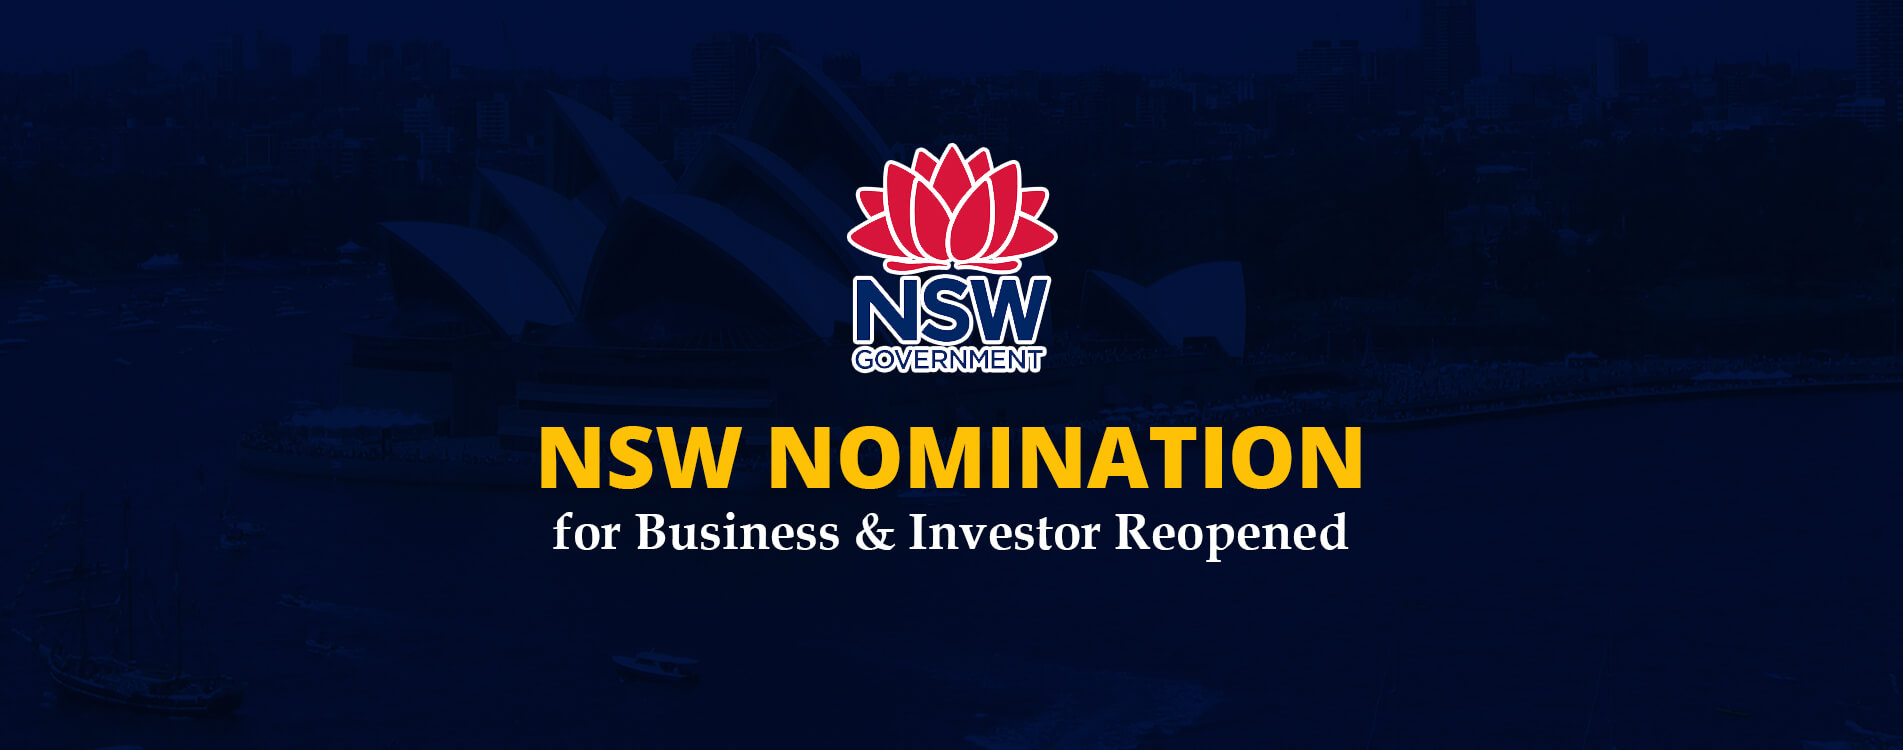 NSW Nomination for Business & Investor Reopened